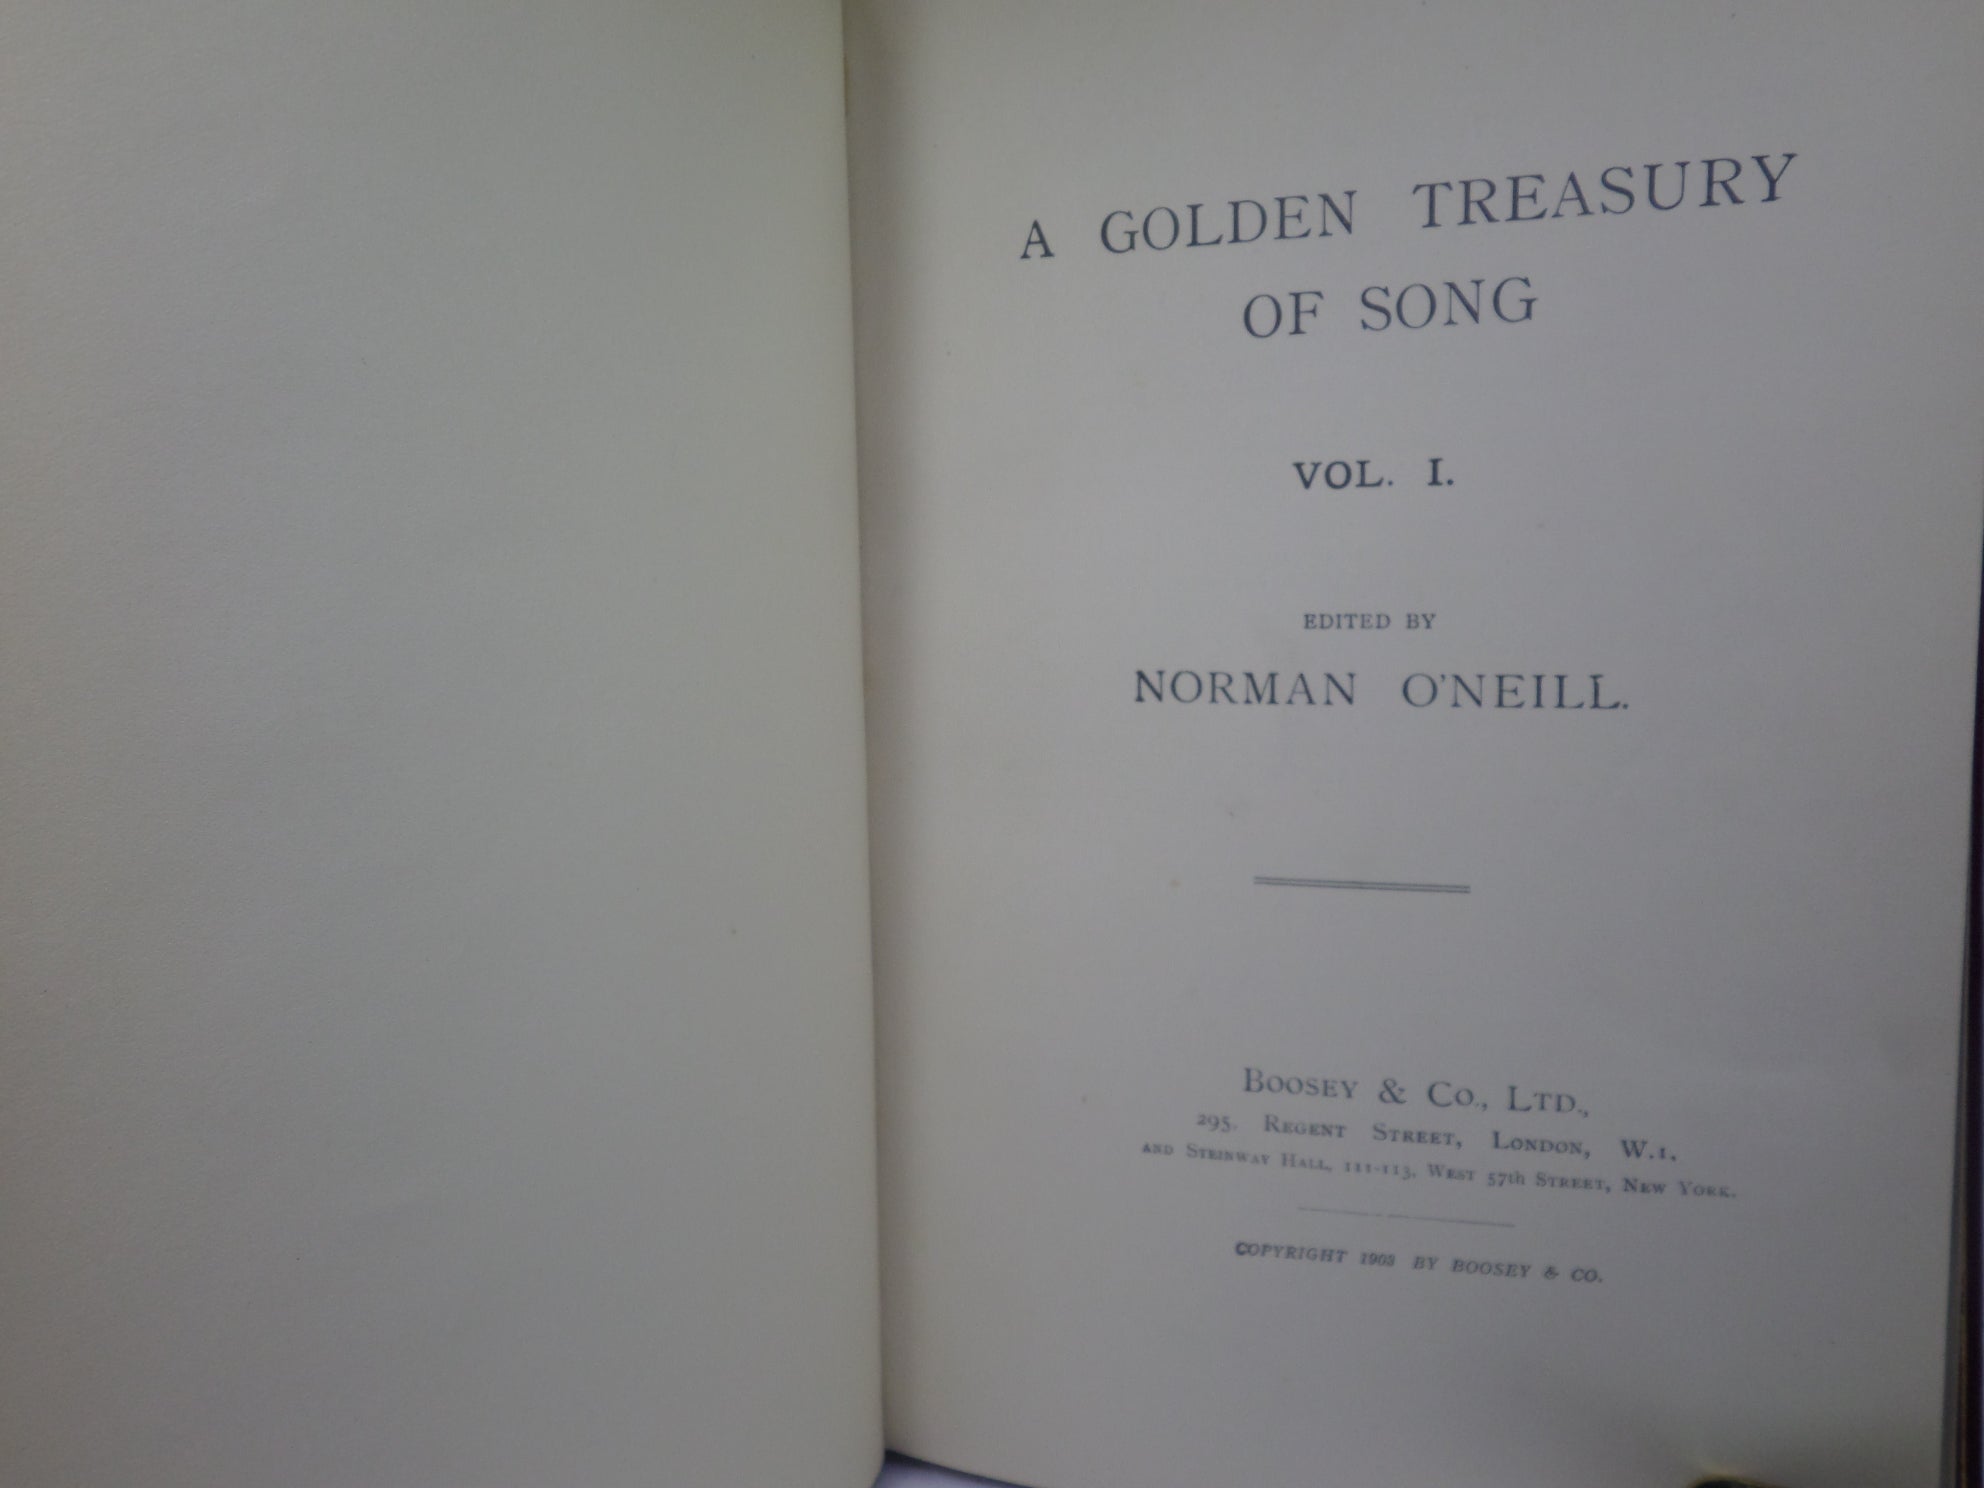 GOLDEN TREASURY OF SONG EDITED BY NORMAN O'NEILL 1903 ARTS & CRAFTS FINE BINDING